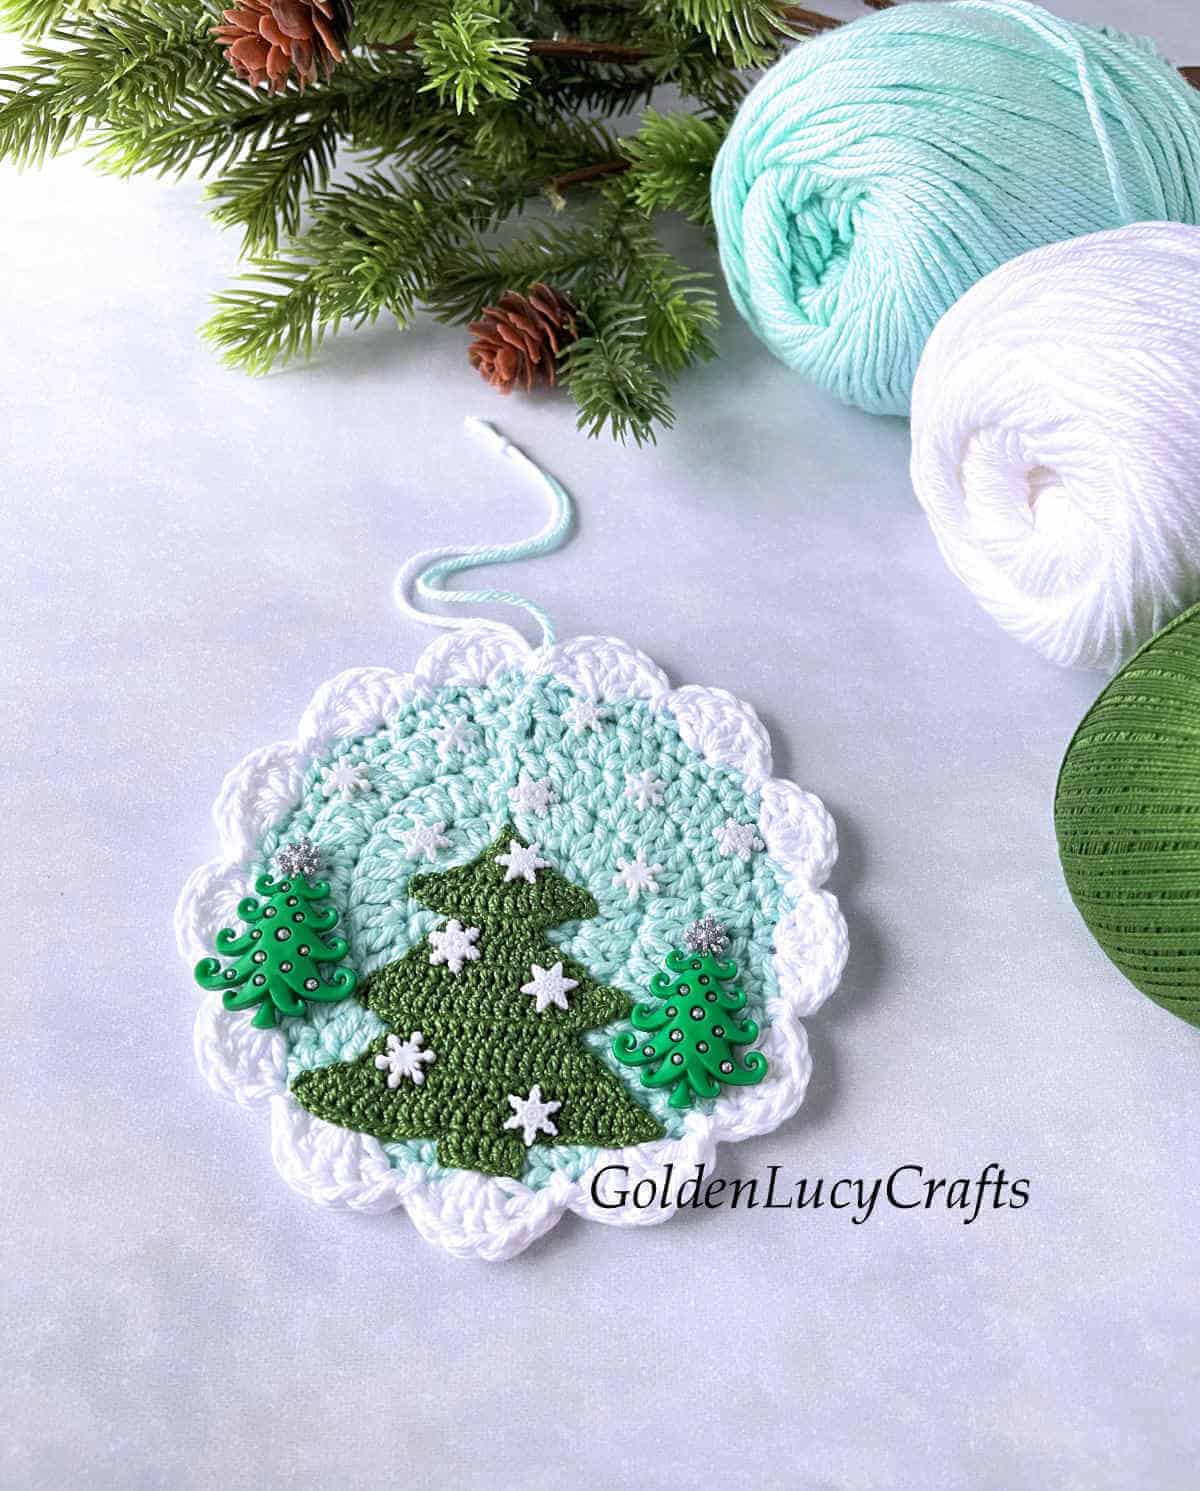 Crochet ornament with Christmas trees laying next to yarn skeins.